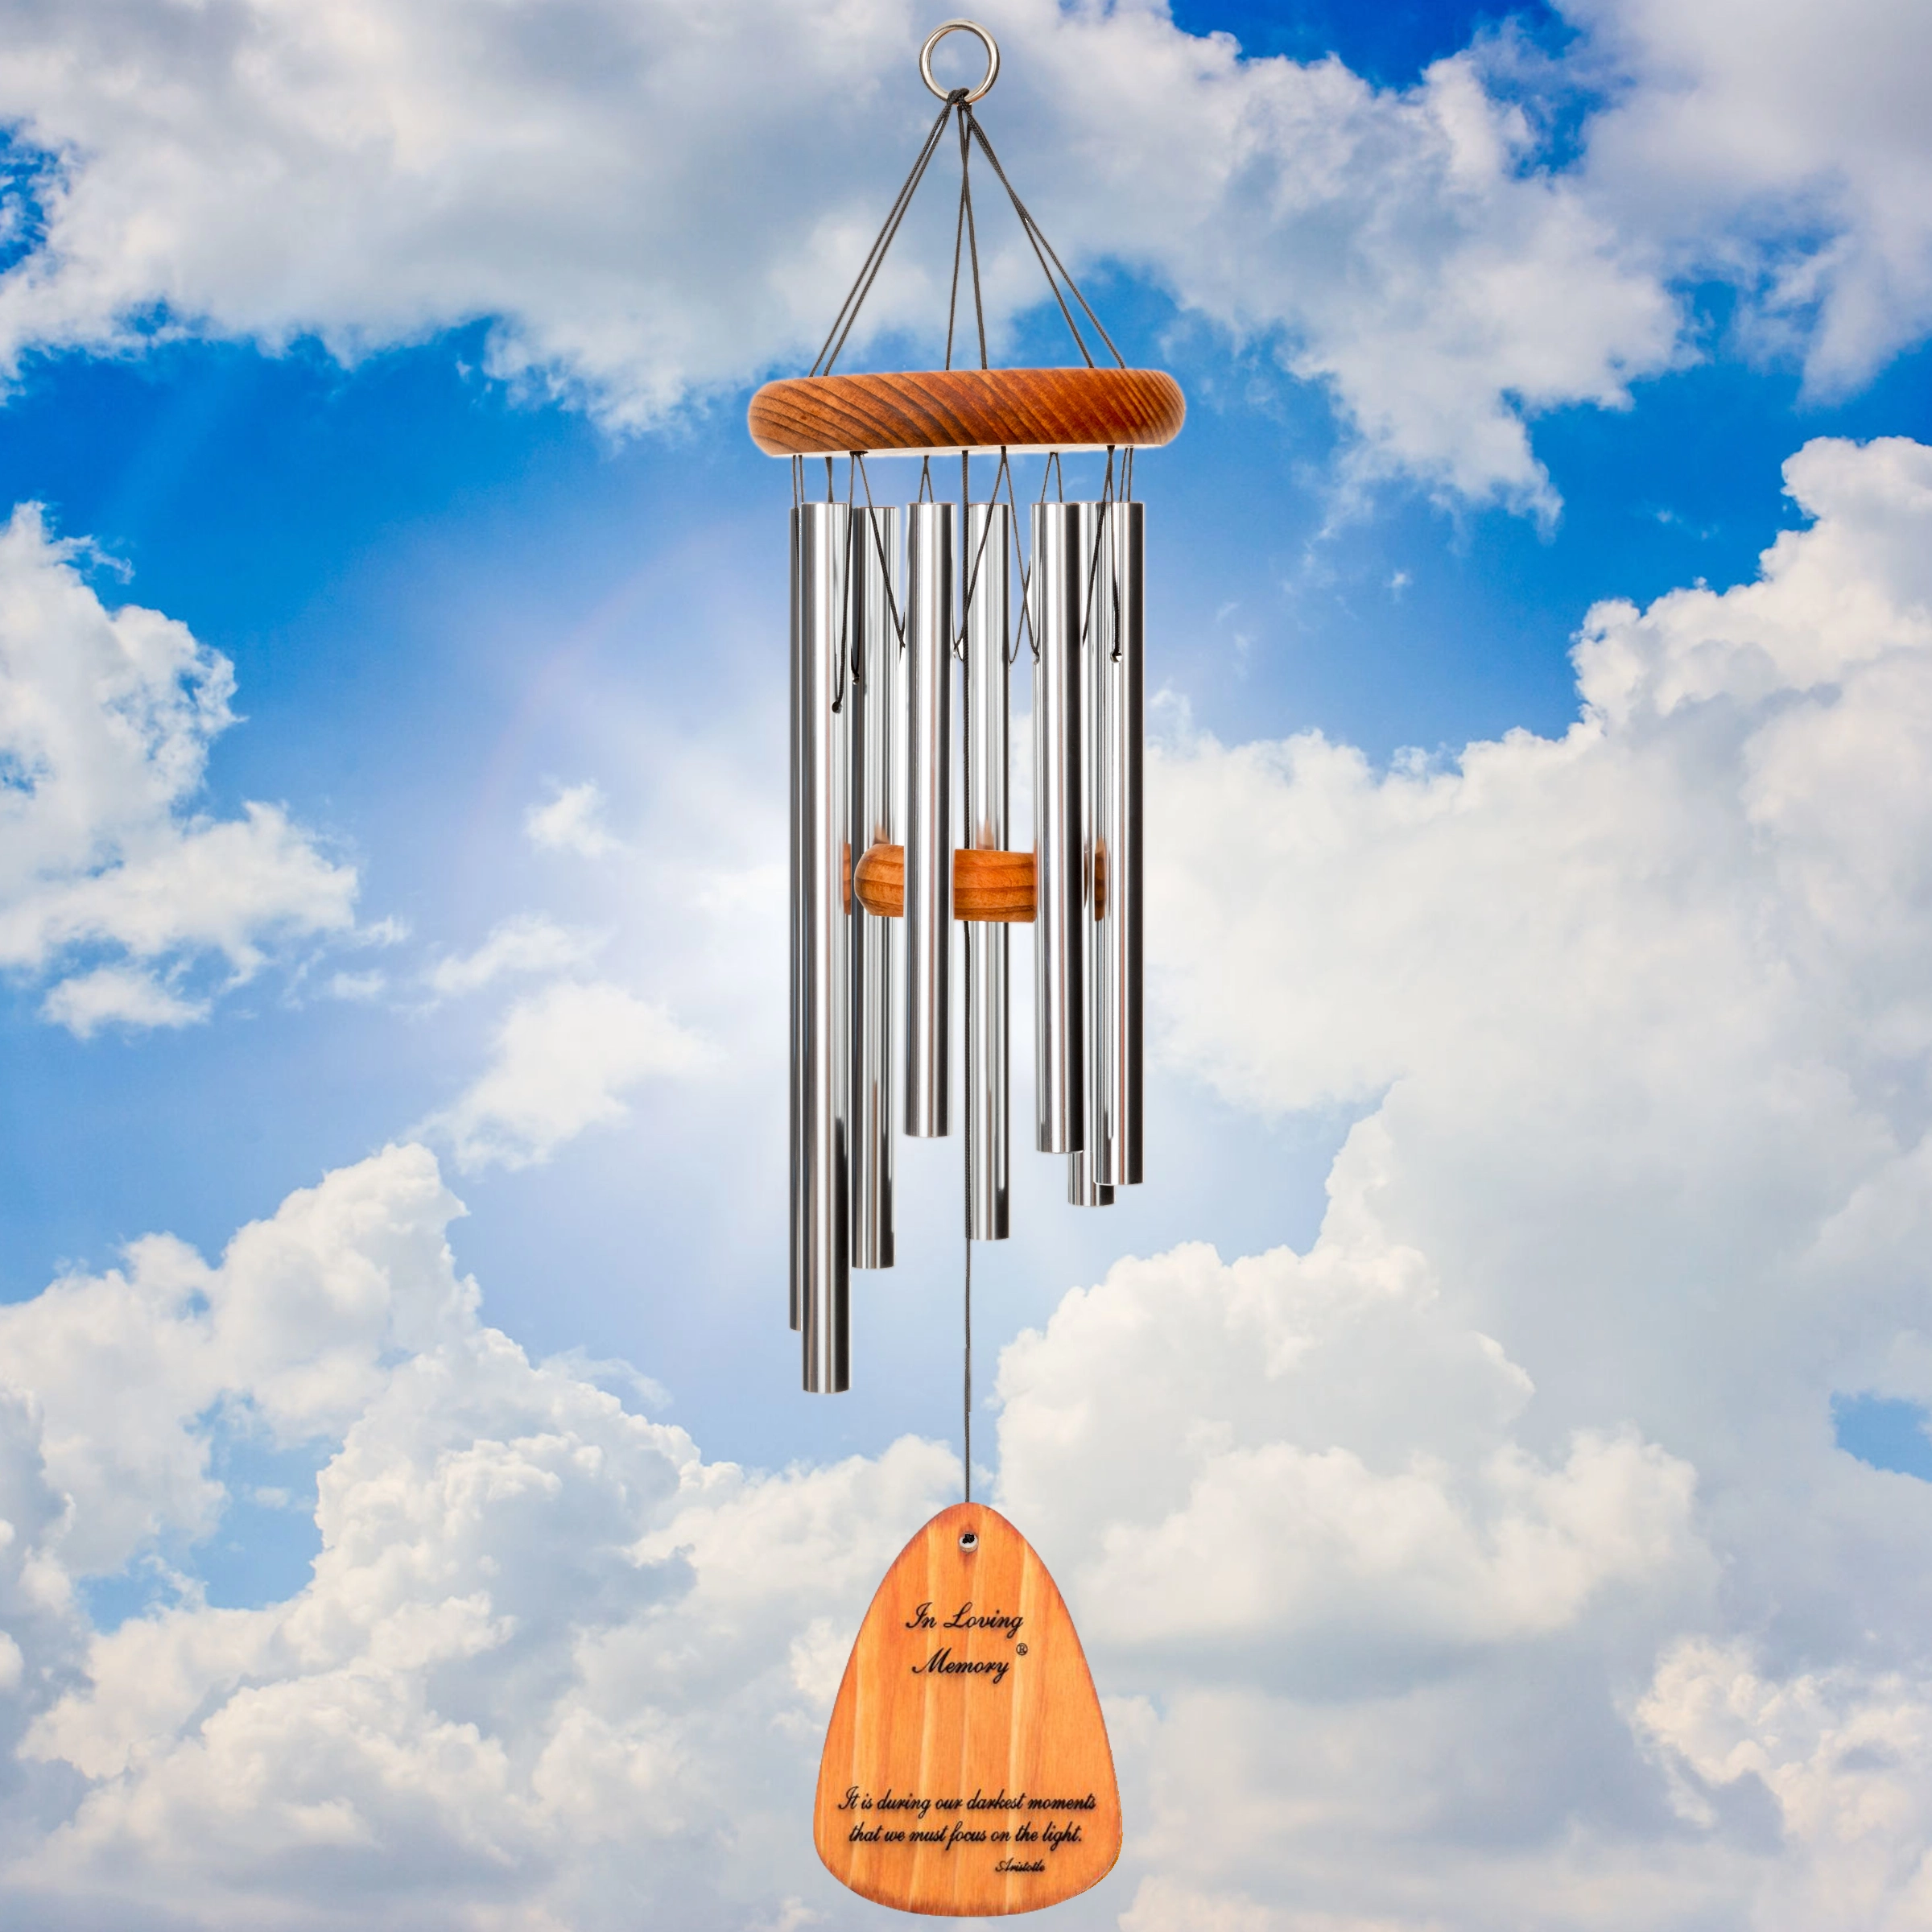 In Loving Memory 24 Inch Windchime - In Loving Memory 24-Inch Windchime It is during our darkest moments - Silver